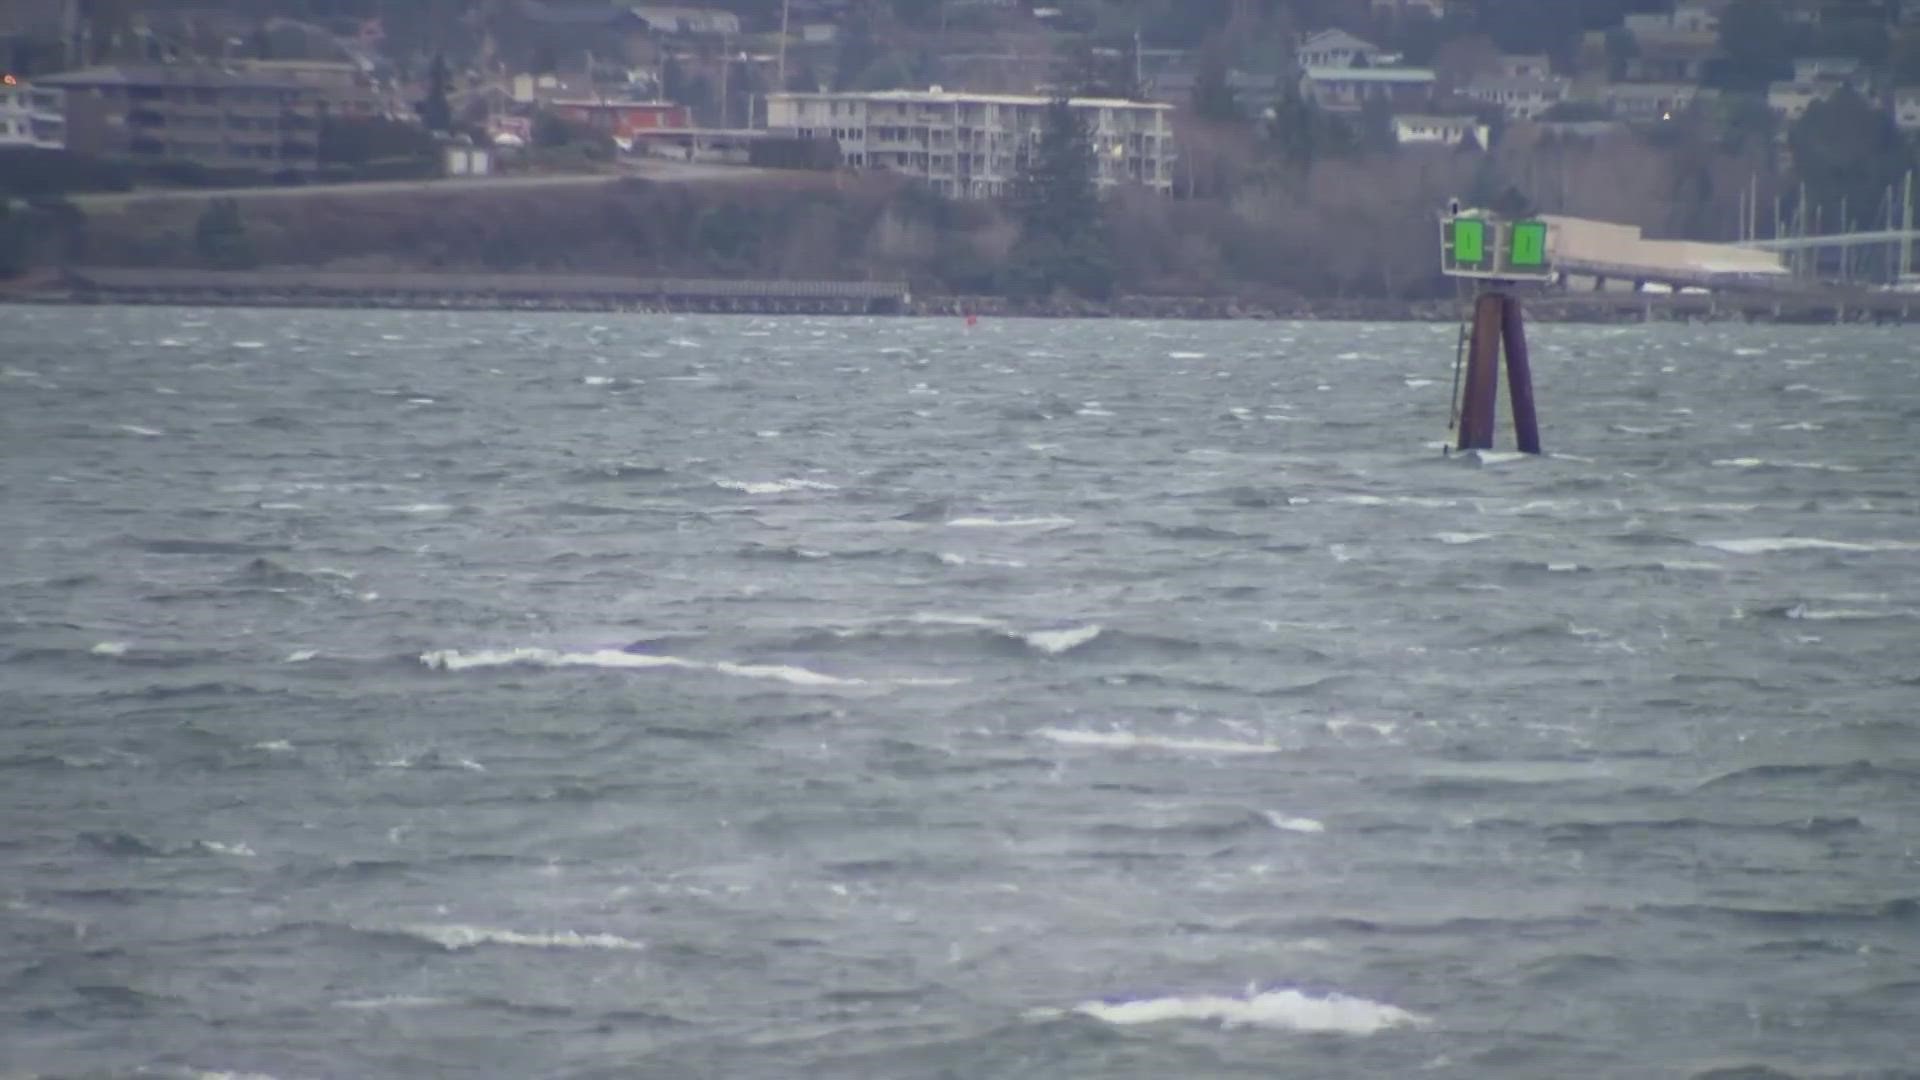 A High Wind Warning and Wind Advisory went into effect Friday morning for parts of western Washington.